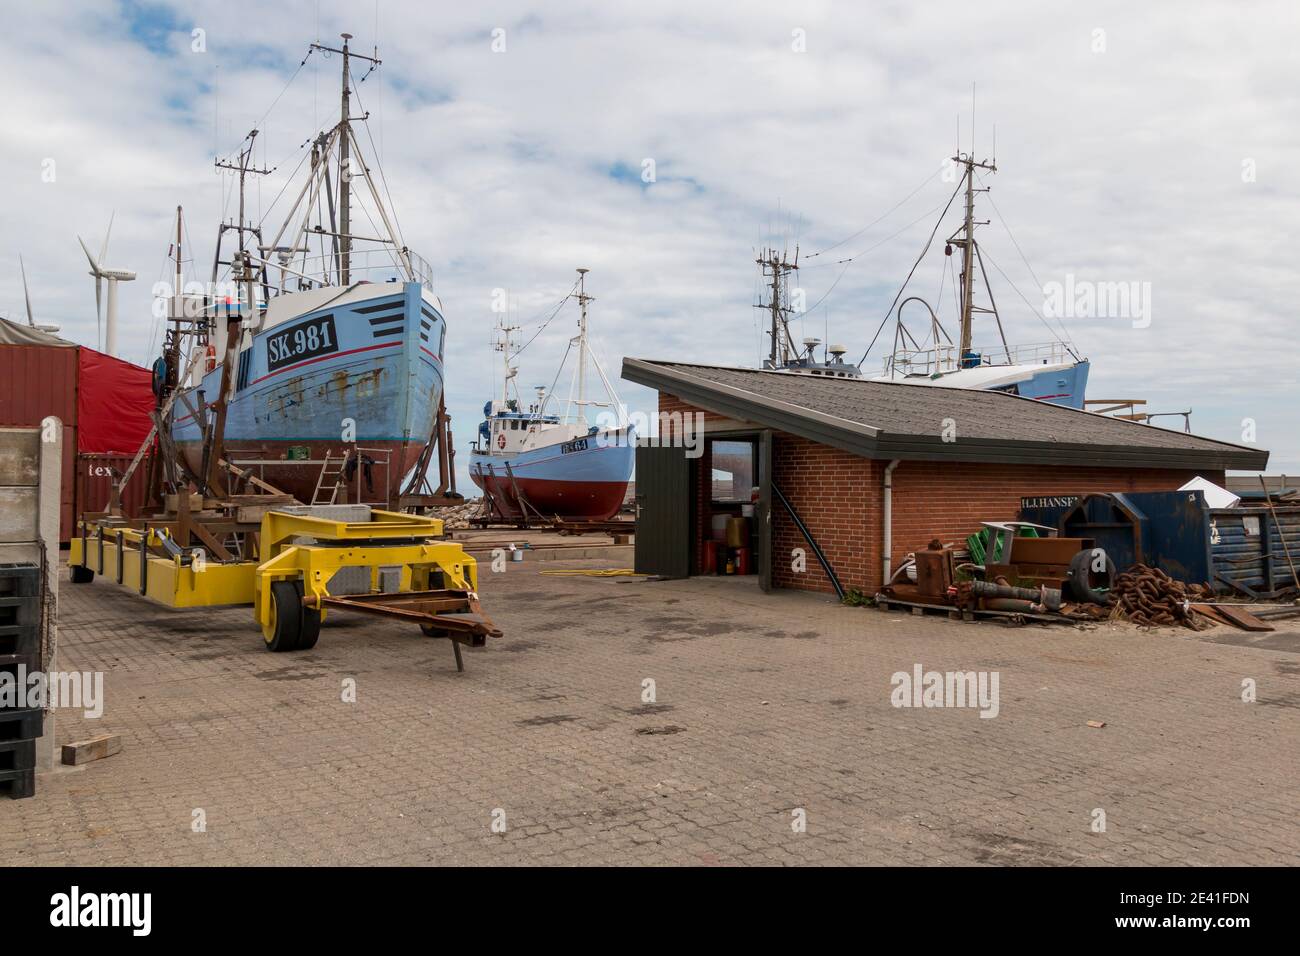 Bonnerup, Denmark - 15 juli 2020: Blue fishing cutters lie in the dock and are being repaired, Stock Photo